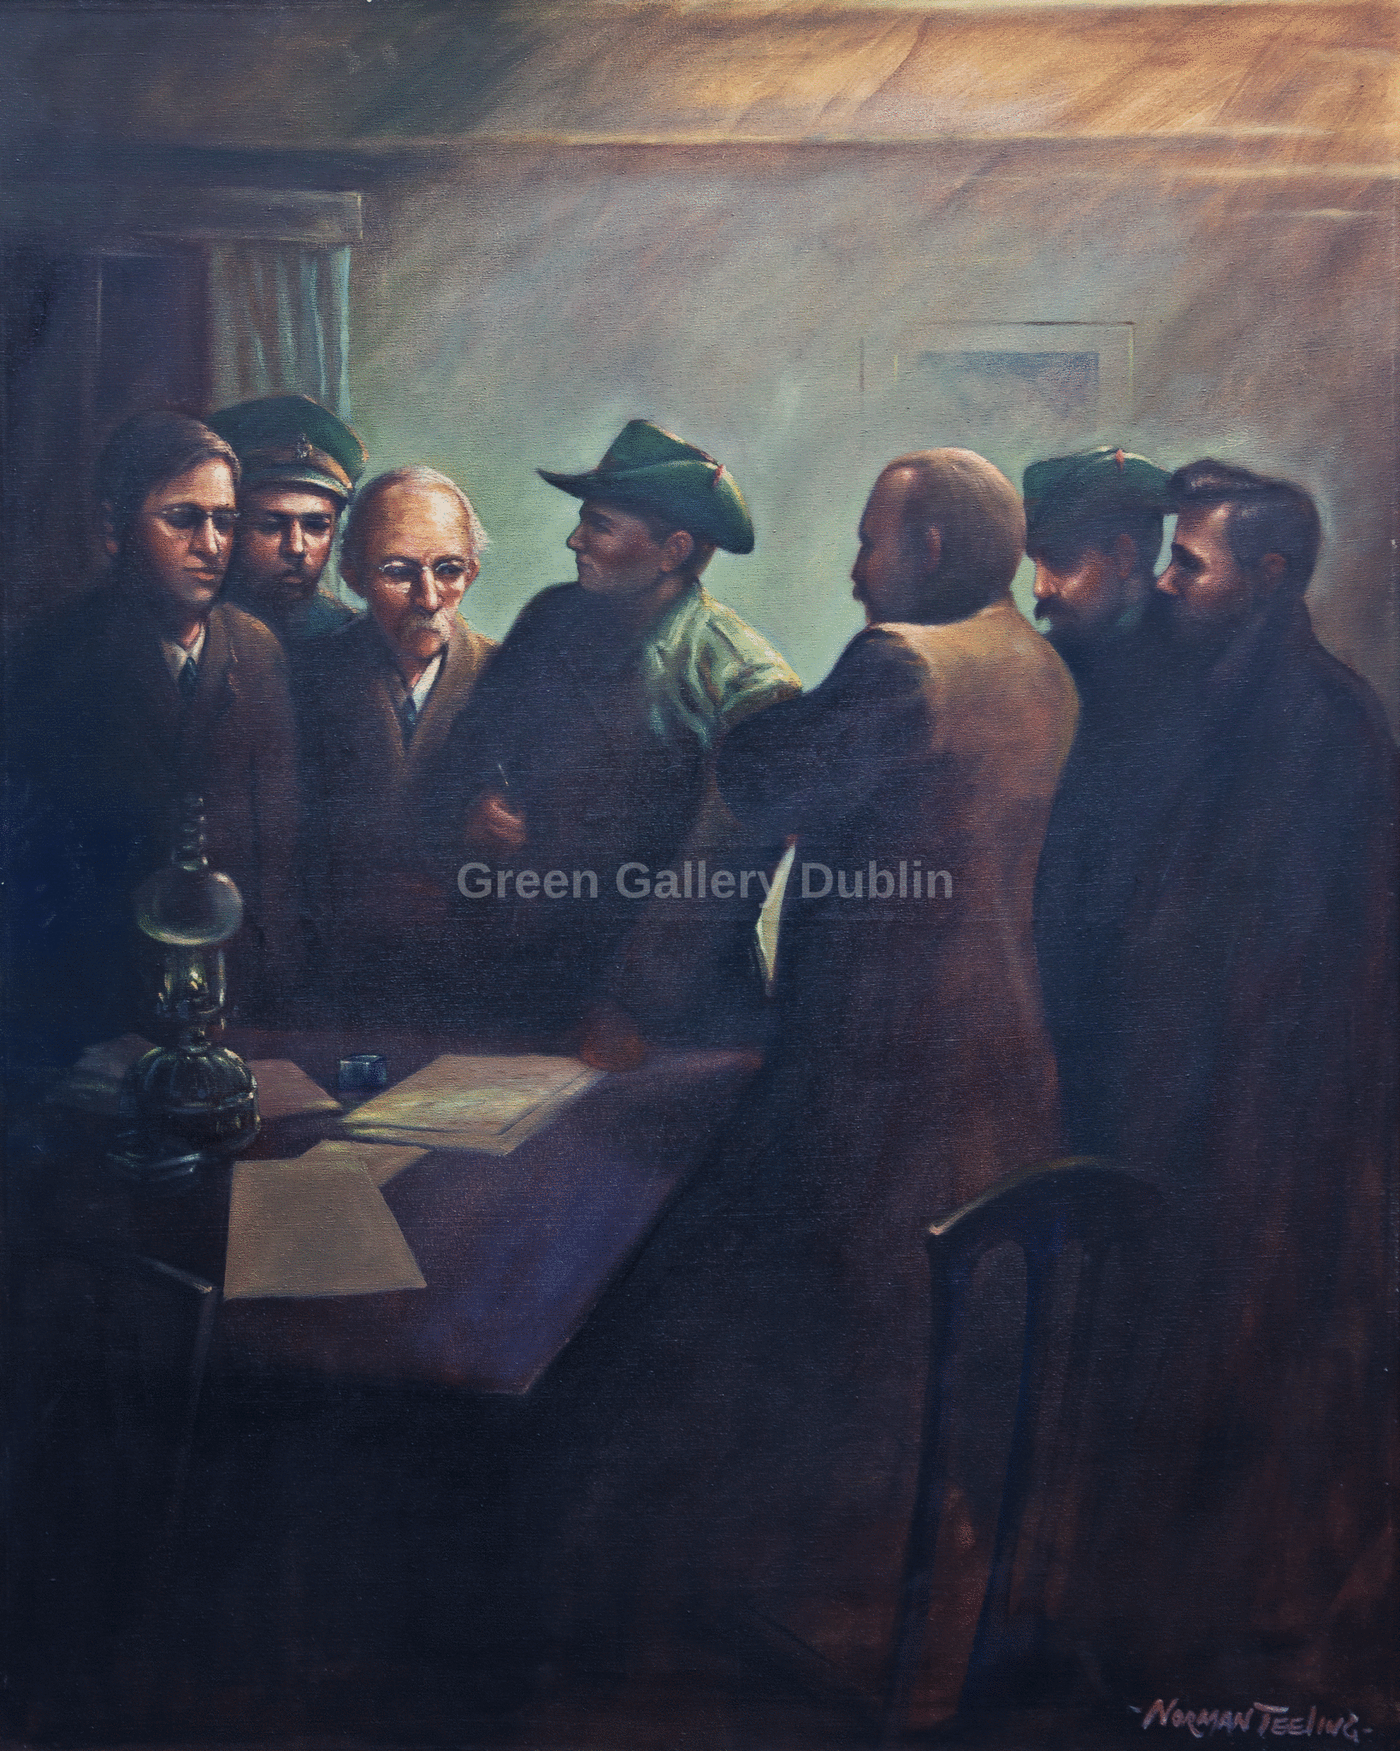 'The Signing Of The Proclamation' by Norman Teeling - Green Gallery